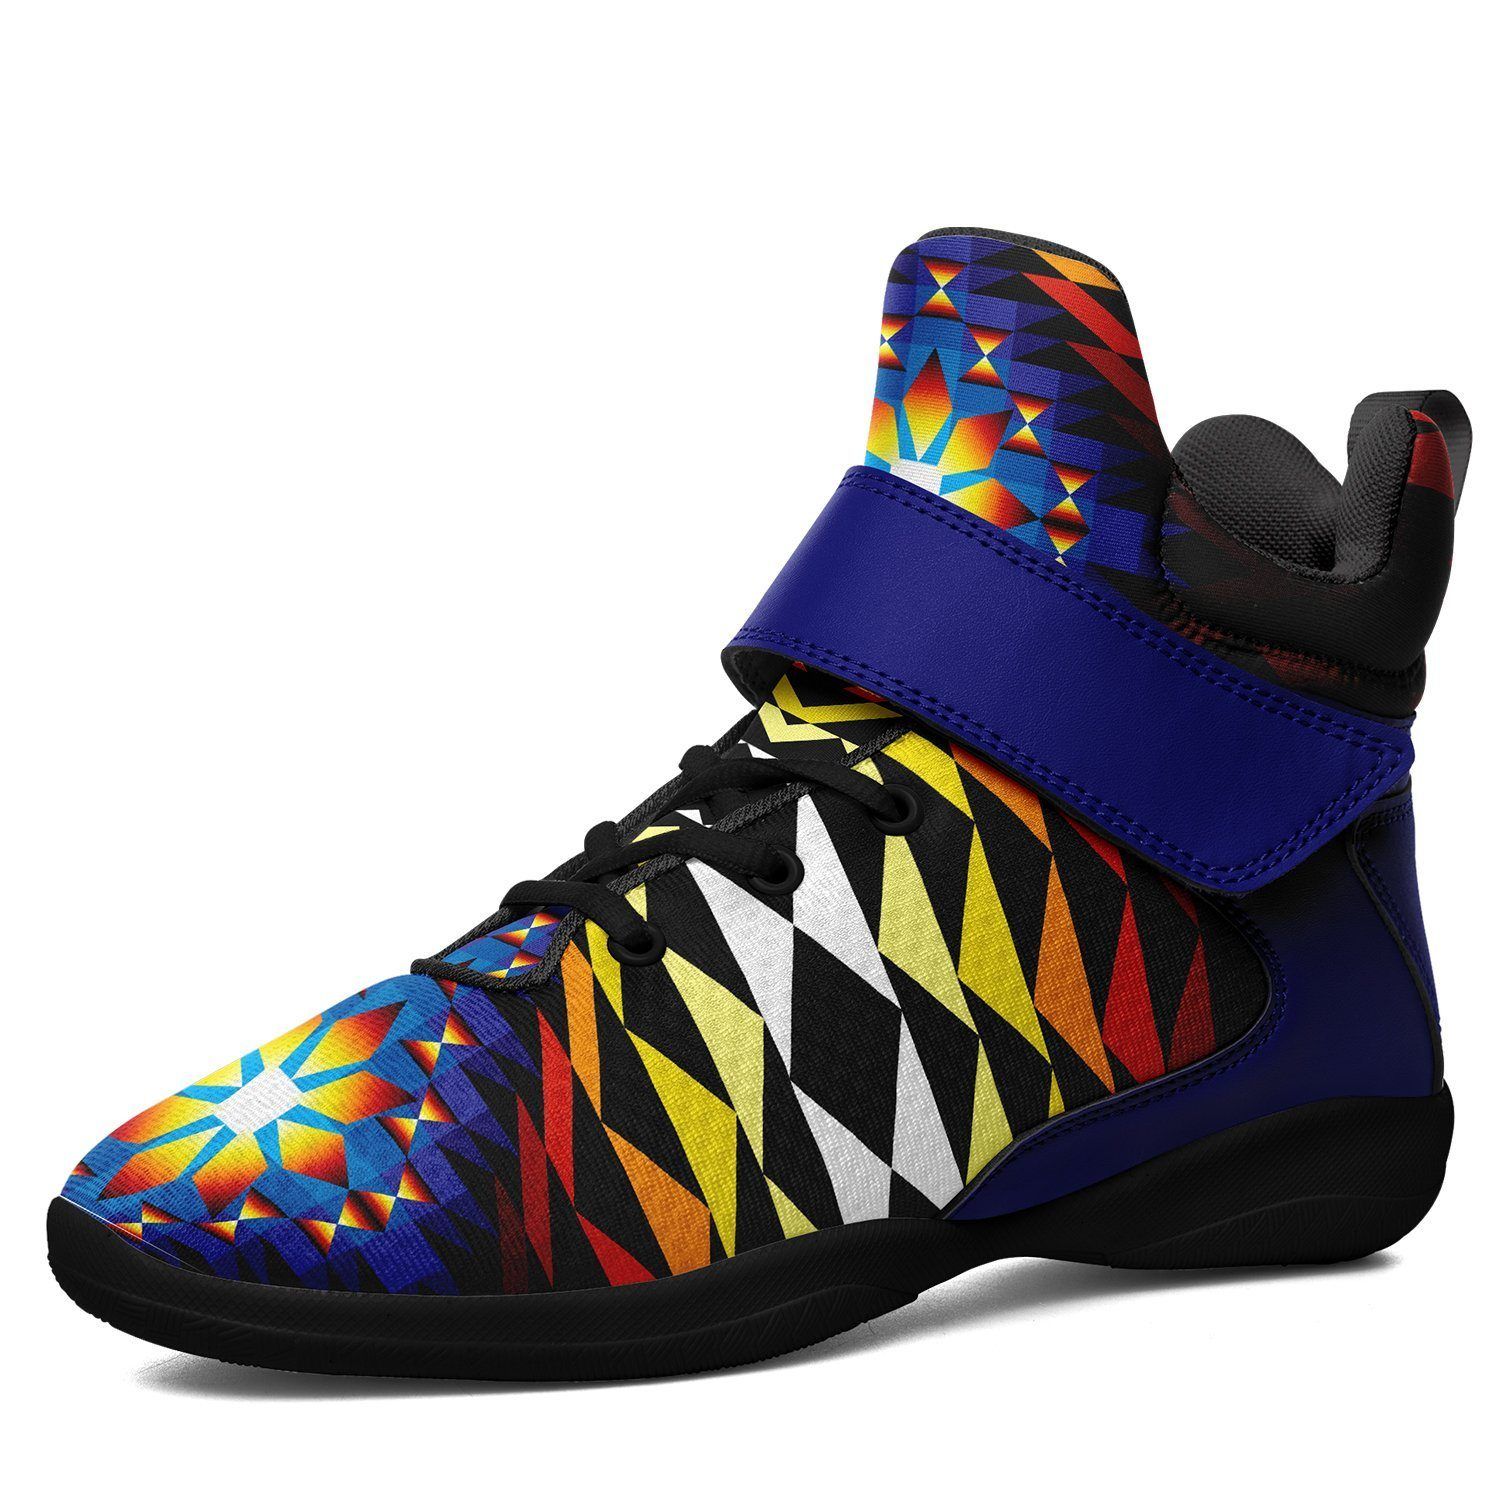 Sunset Blanket Ipottaa Basketball / Sport High Top Shoes - Black Sole 49 Dzine US Men 7 / EUR 40 Black Sole with Blue Strap 